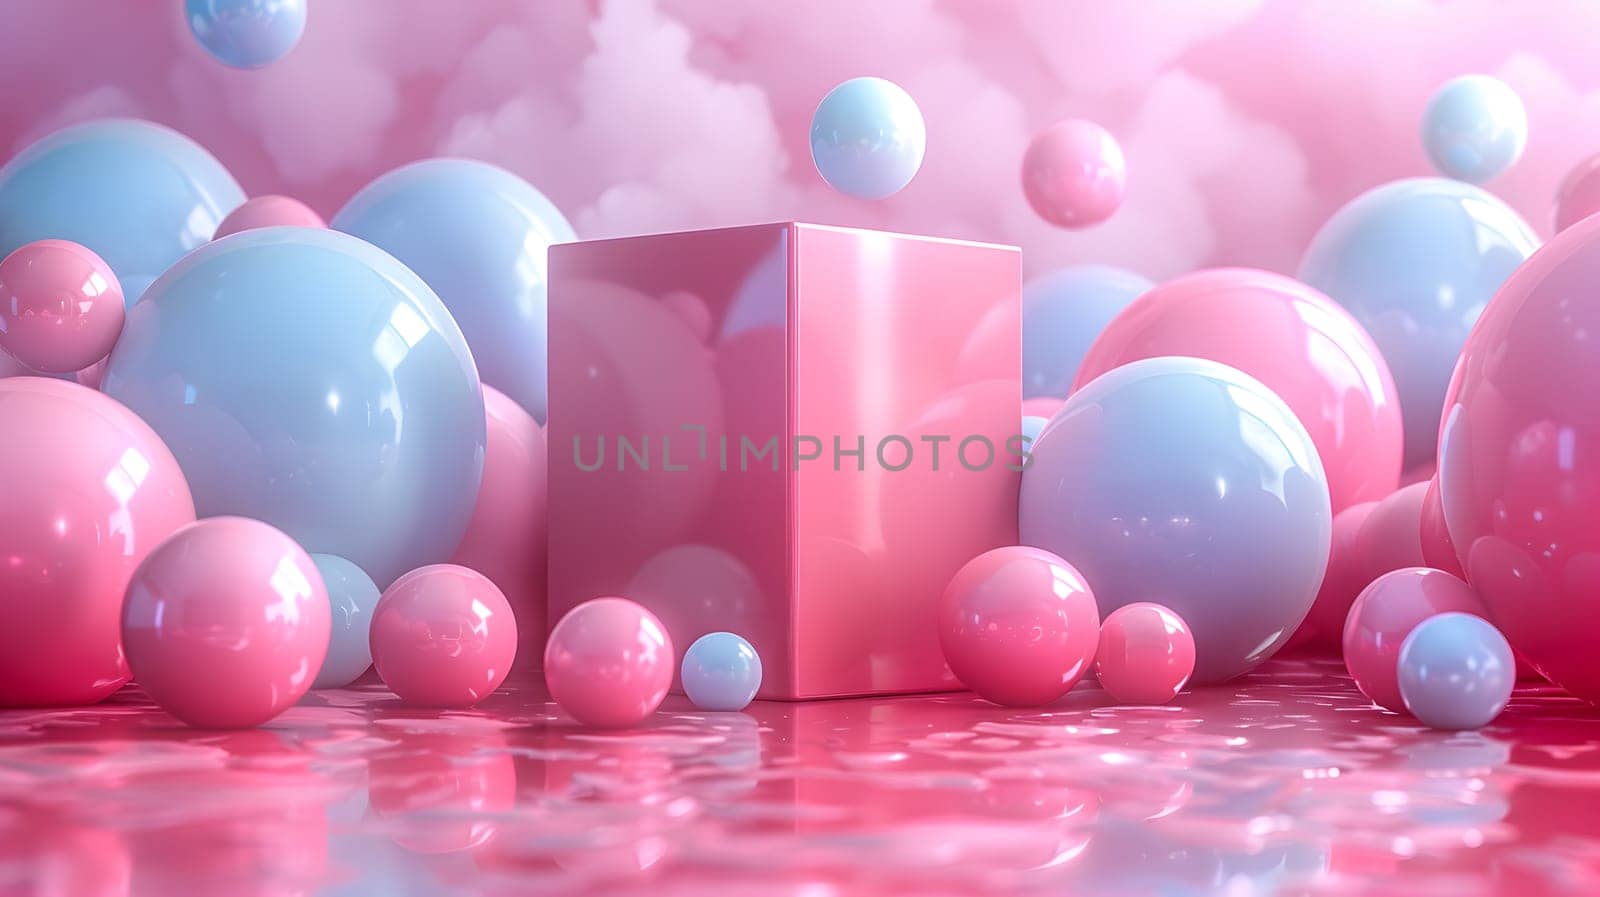 An artistic display of azure, natural material balloons in pink, aqua, magenta, and electric blue creating a beautiful pattern for a special event